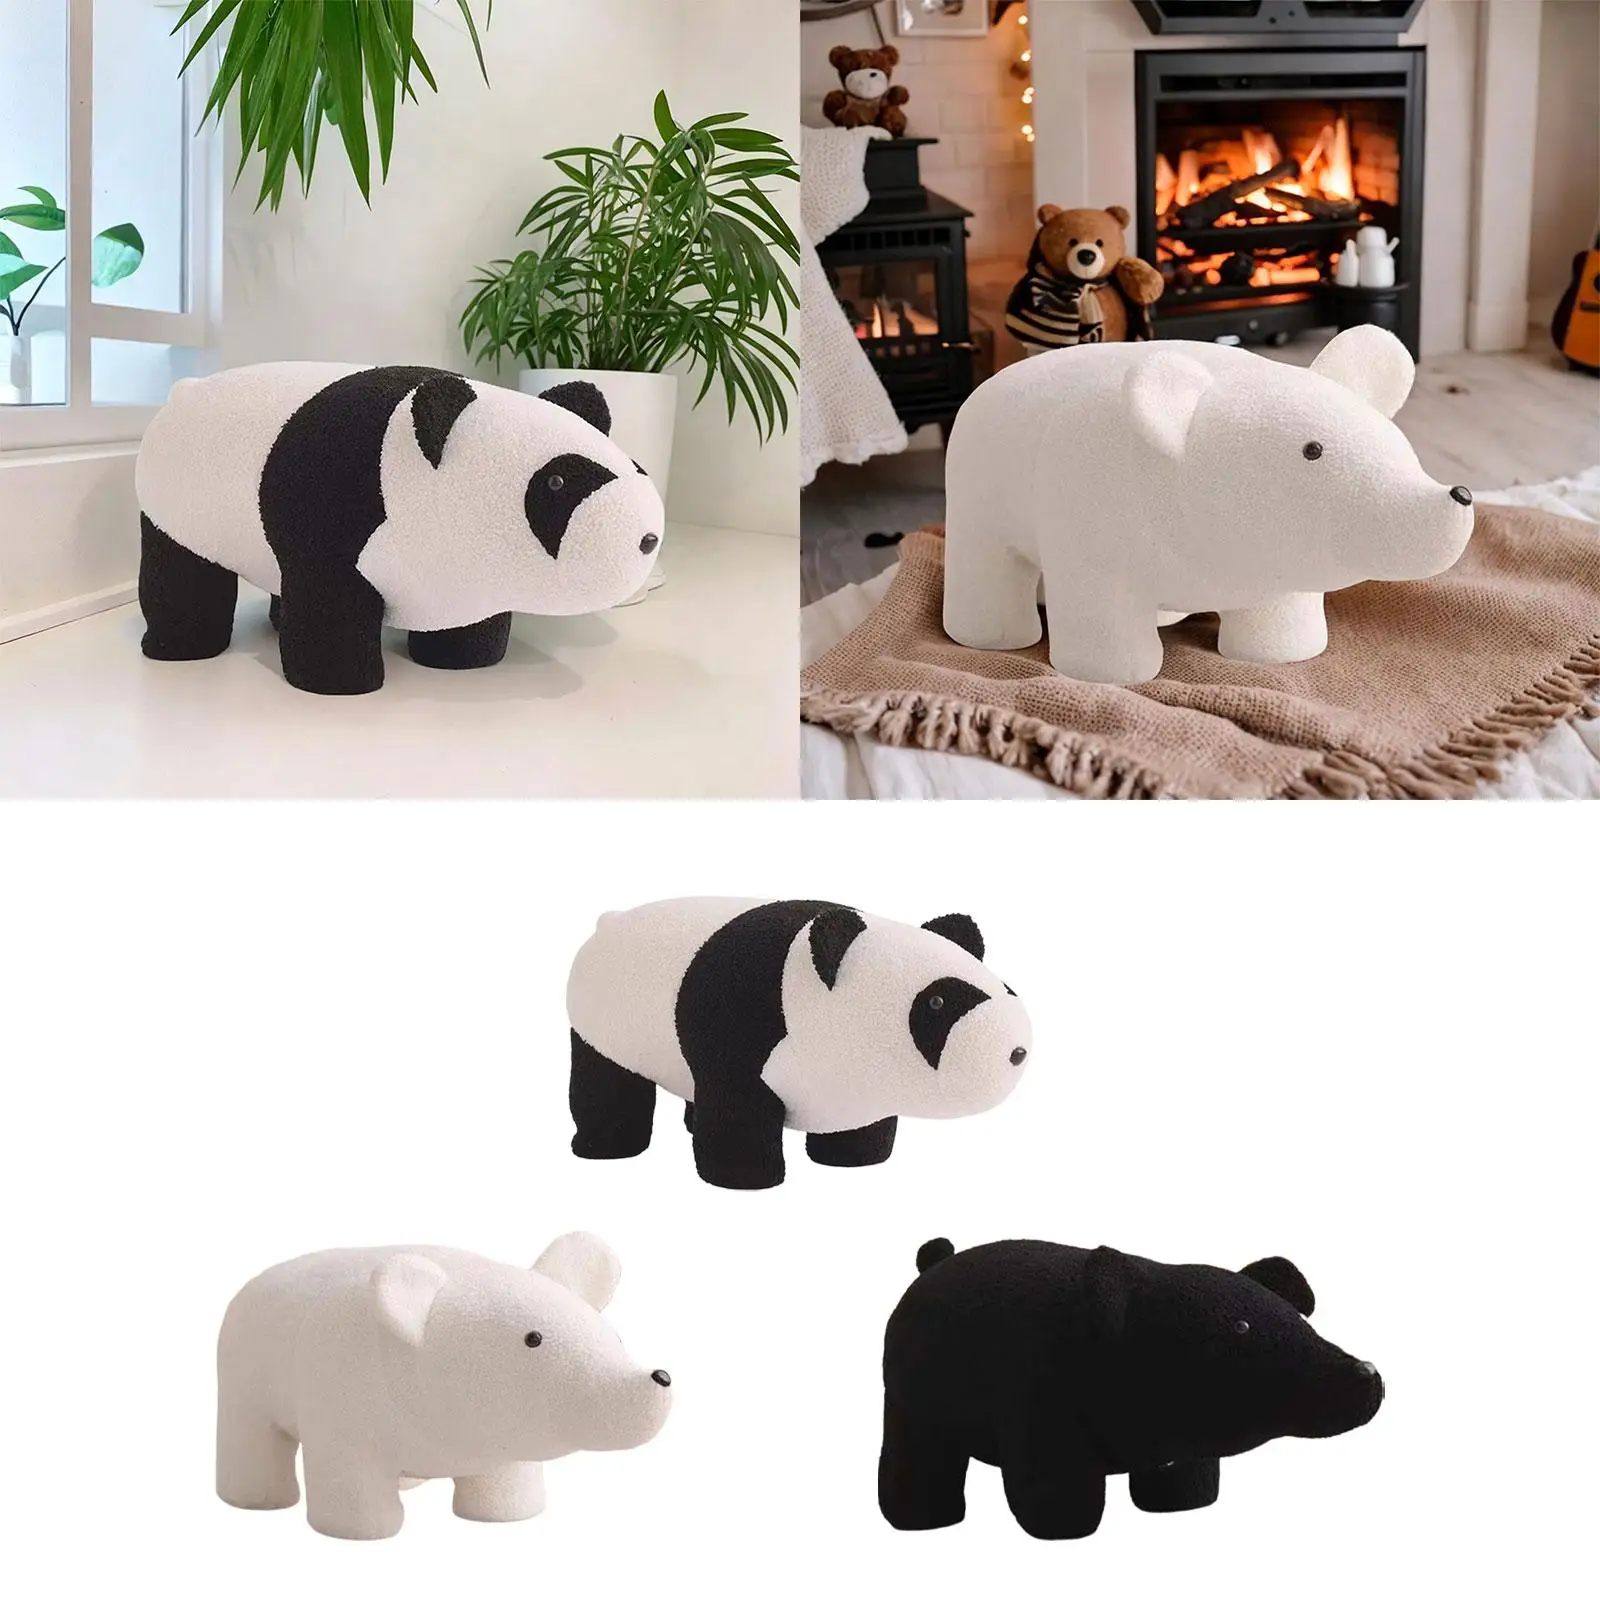 Cute Animal Footstools Stable Soft Padded Non Skid Shoe Changing Stool Small Footstool for Playroom Home Bedroom Living Room